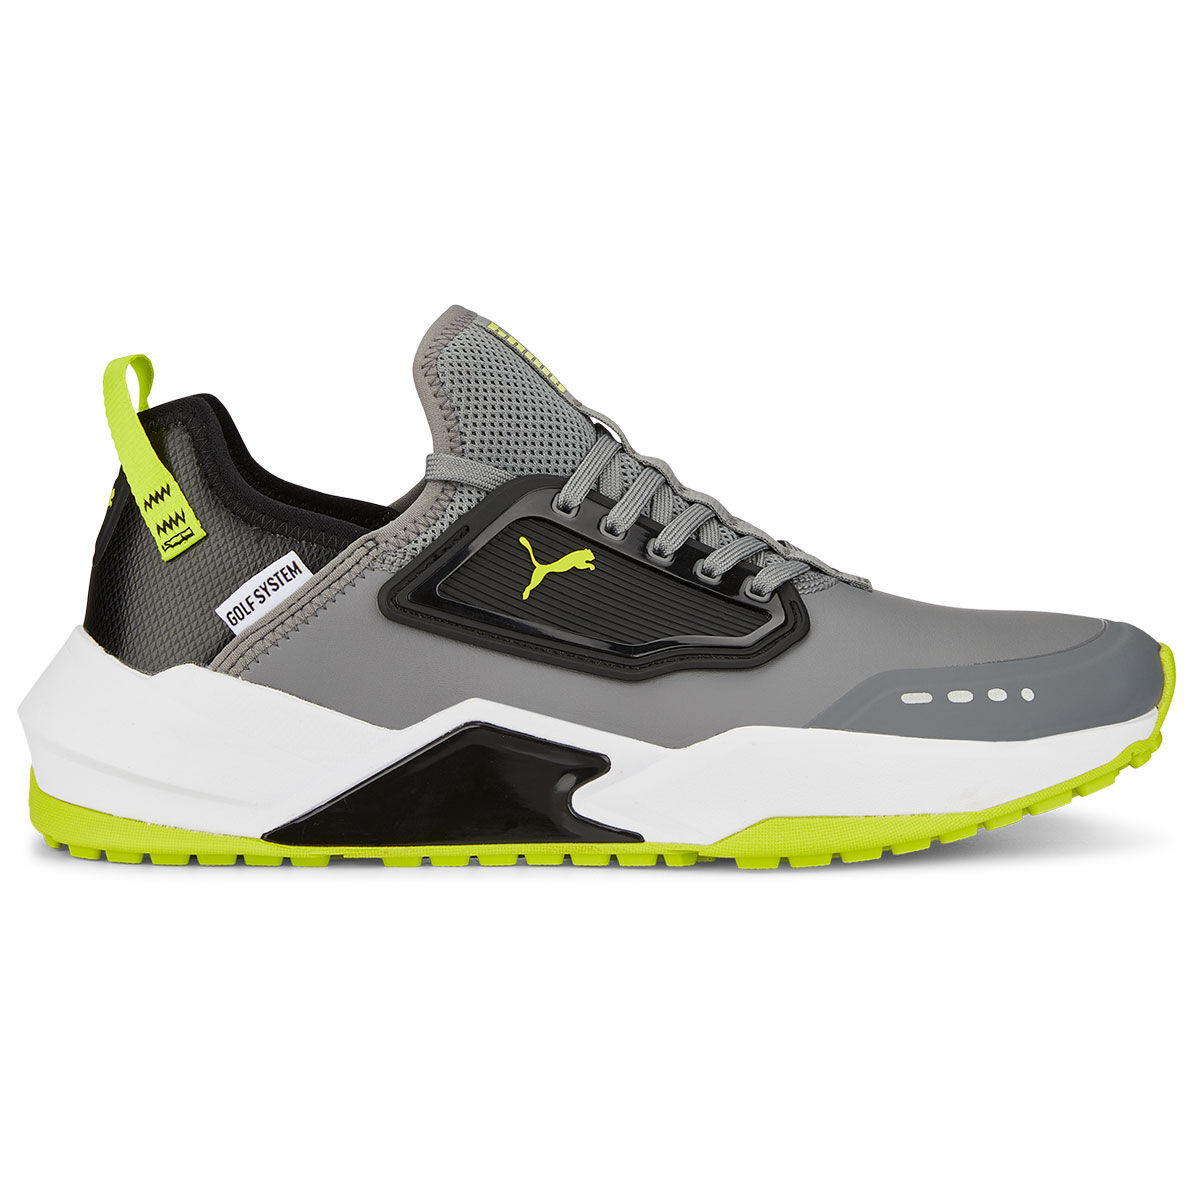 PUMA Men’s GS-One Waterproof Spikeless Golf Shoes, Mens, Quiet shade/black lime/smash, 7 | American Golf